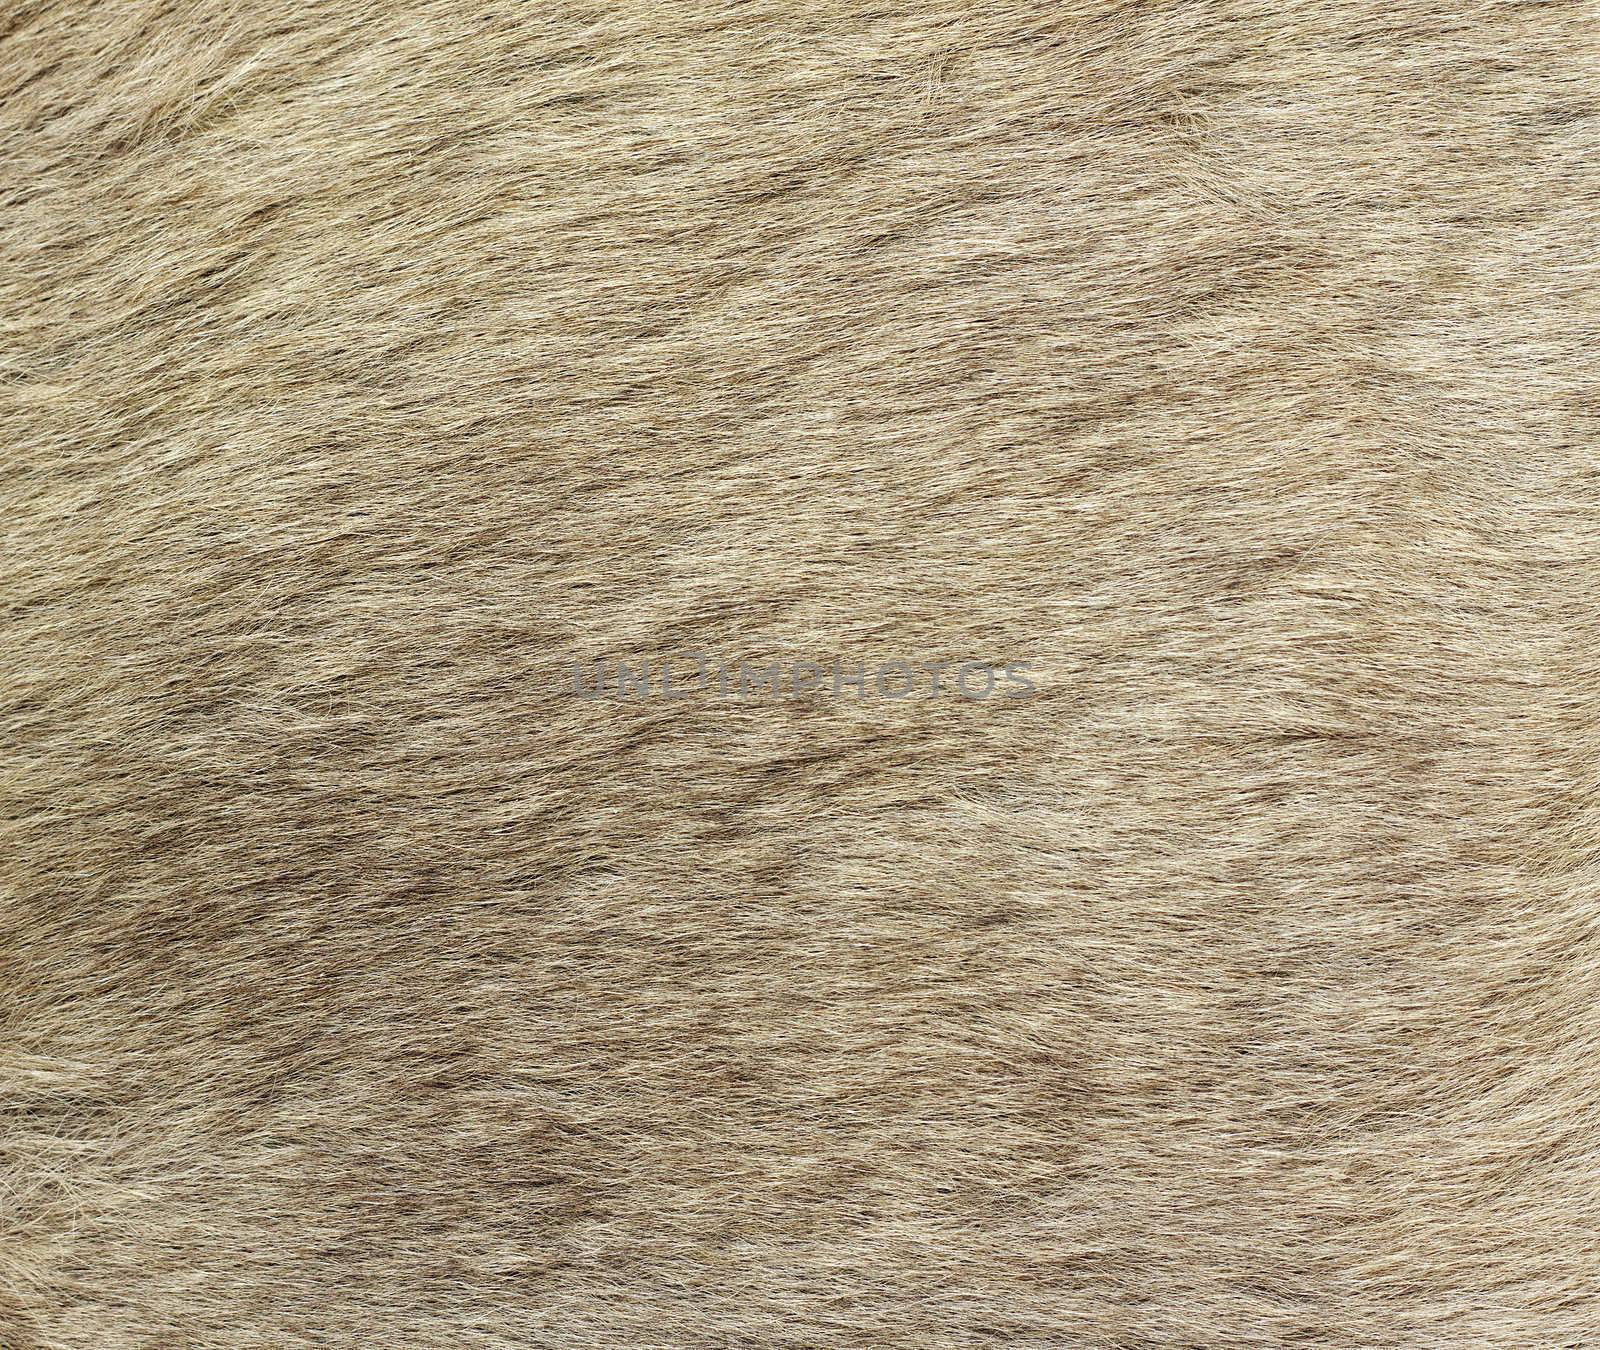 A closeup image of kangaroo fur. Great for texture, background or wallpaper.